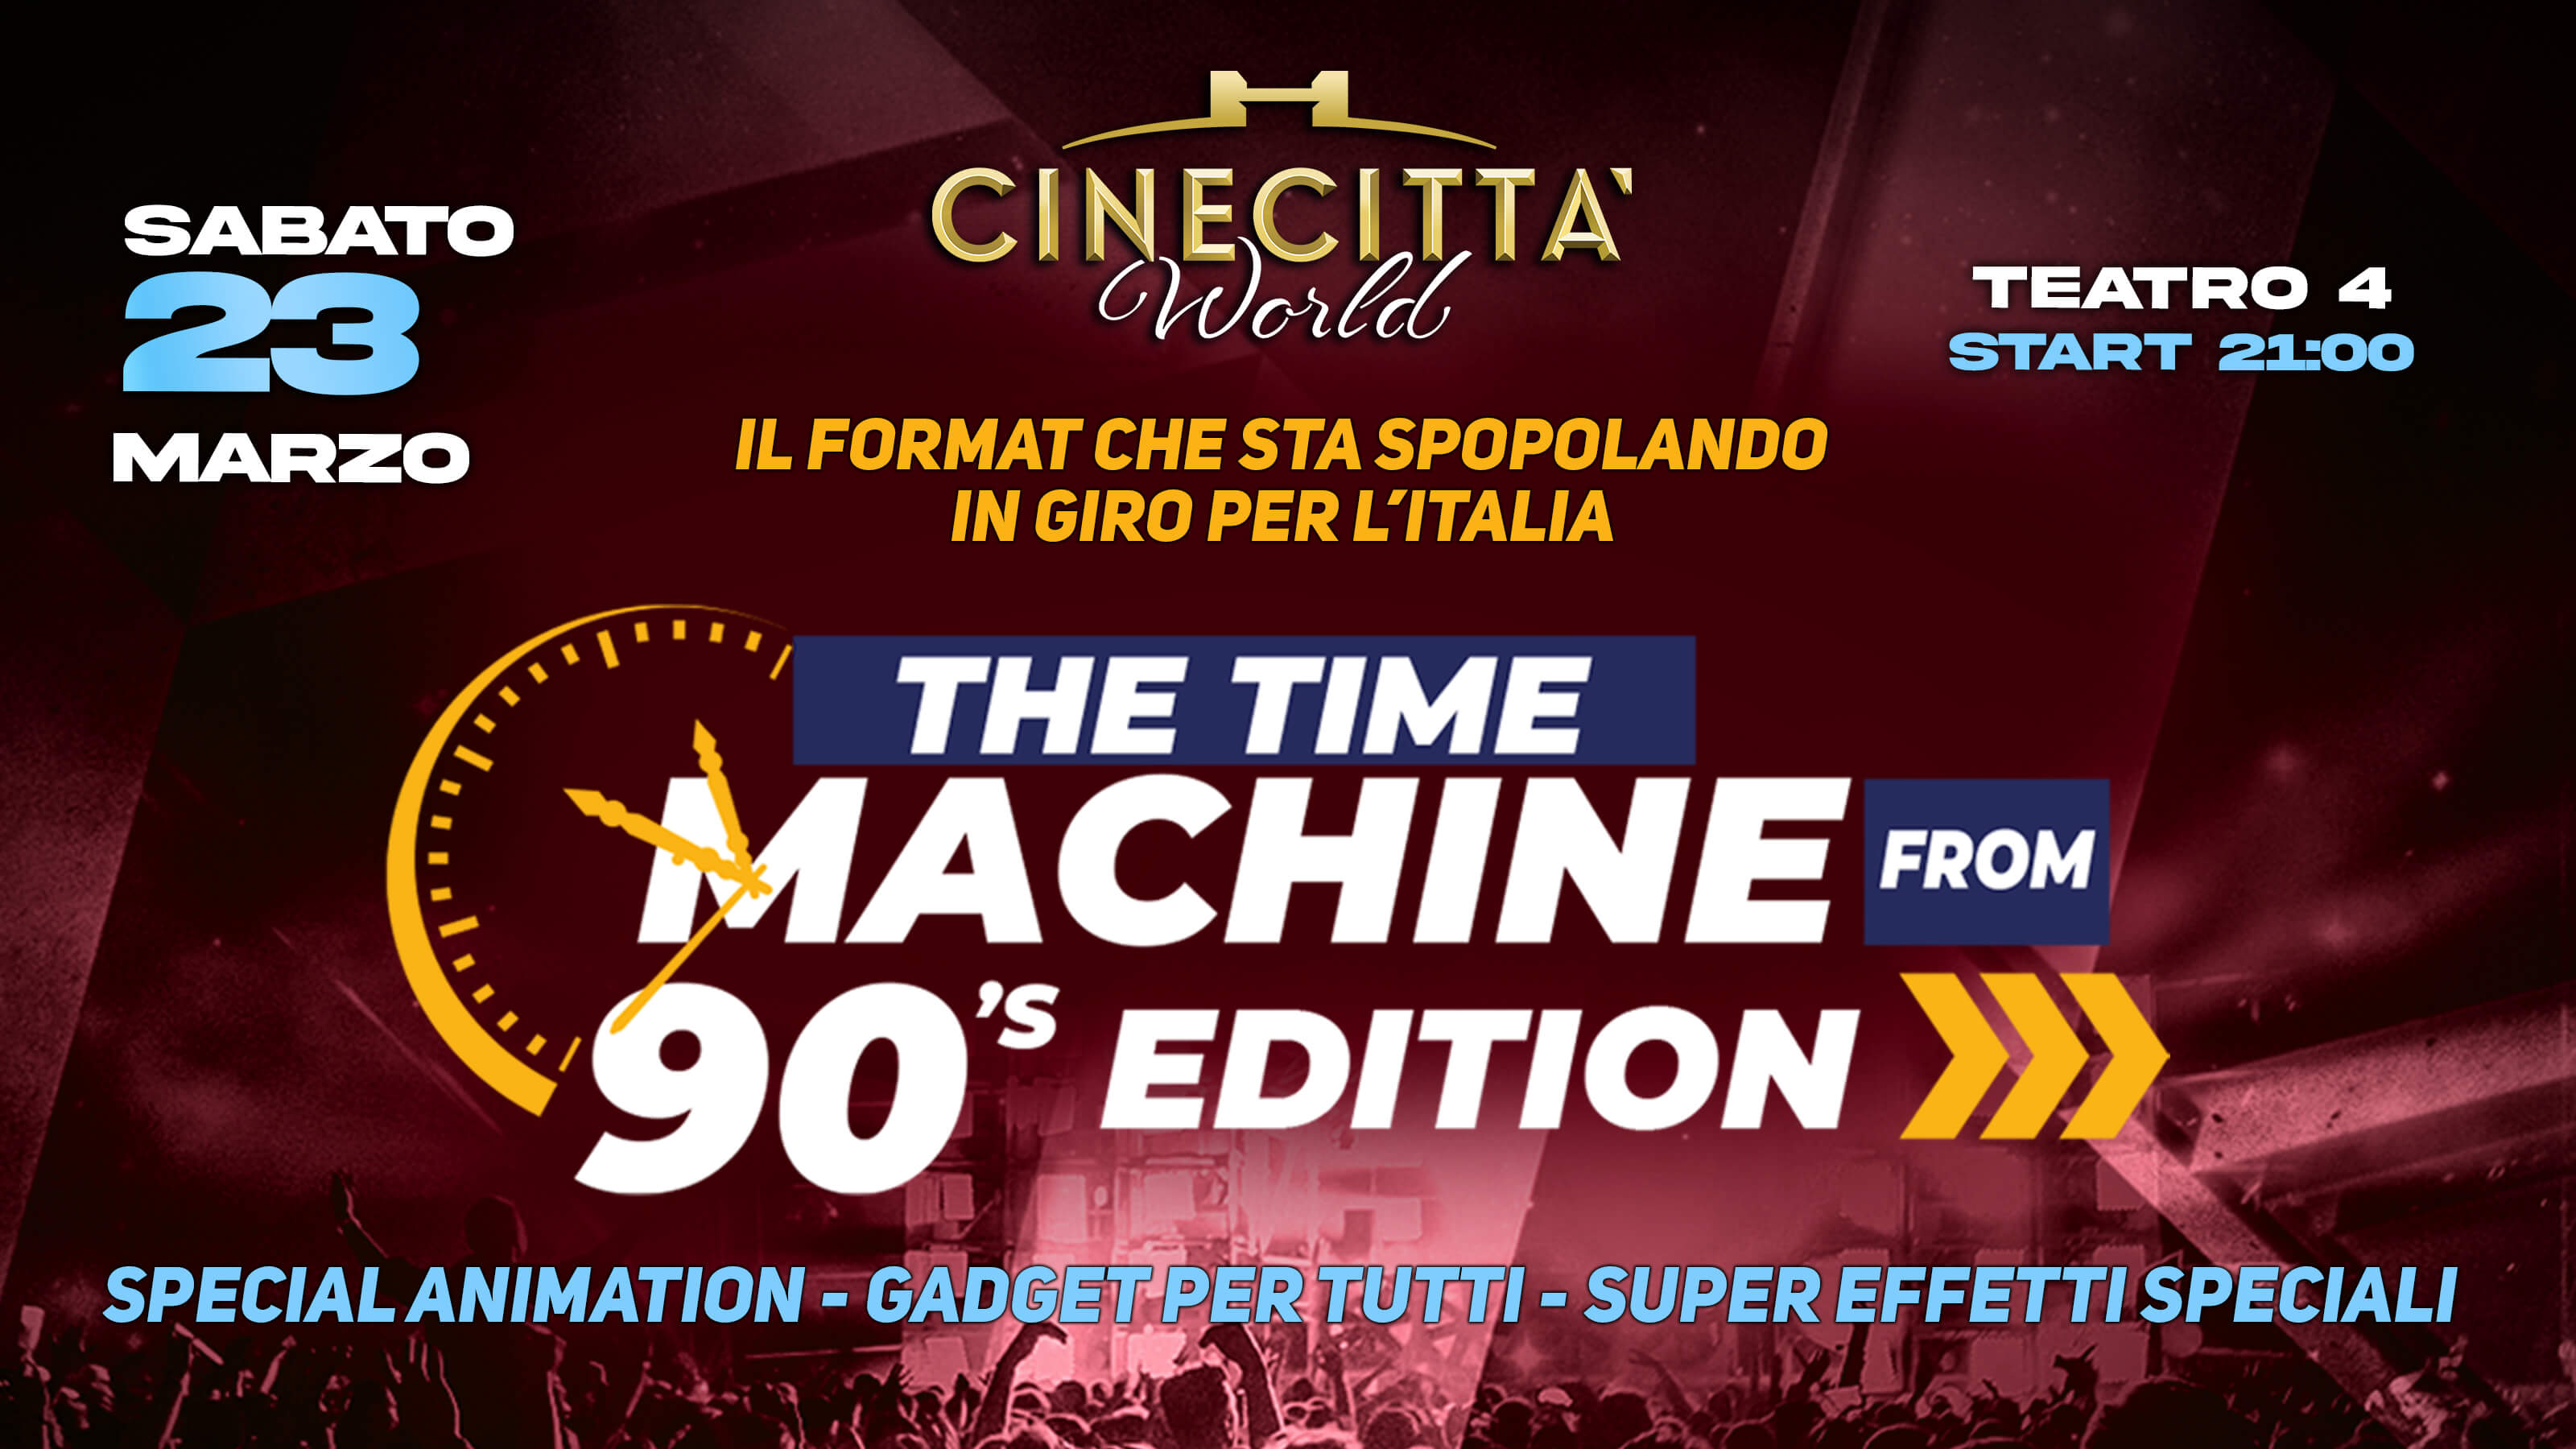 New Year's Eve at Cinecittà World 41